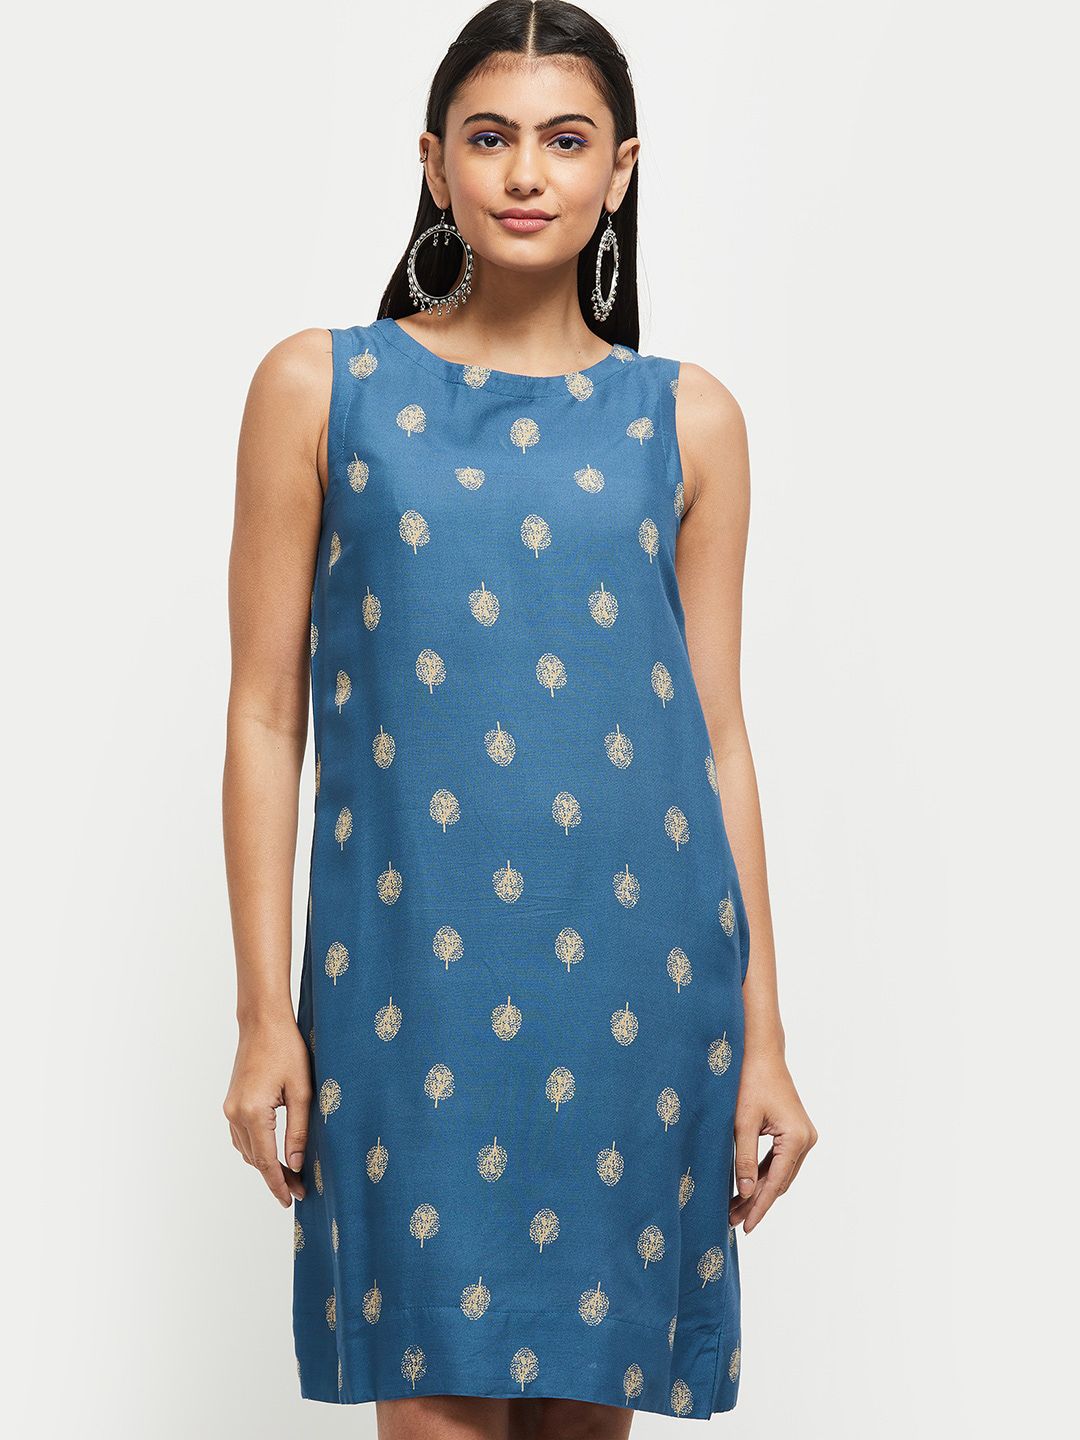 max Women Blue A-Line Dress Price in India